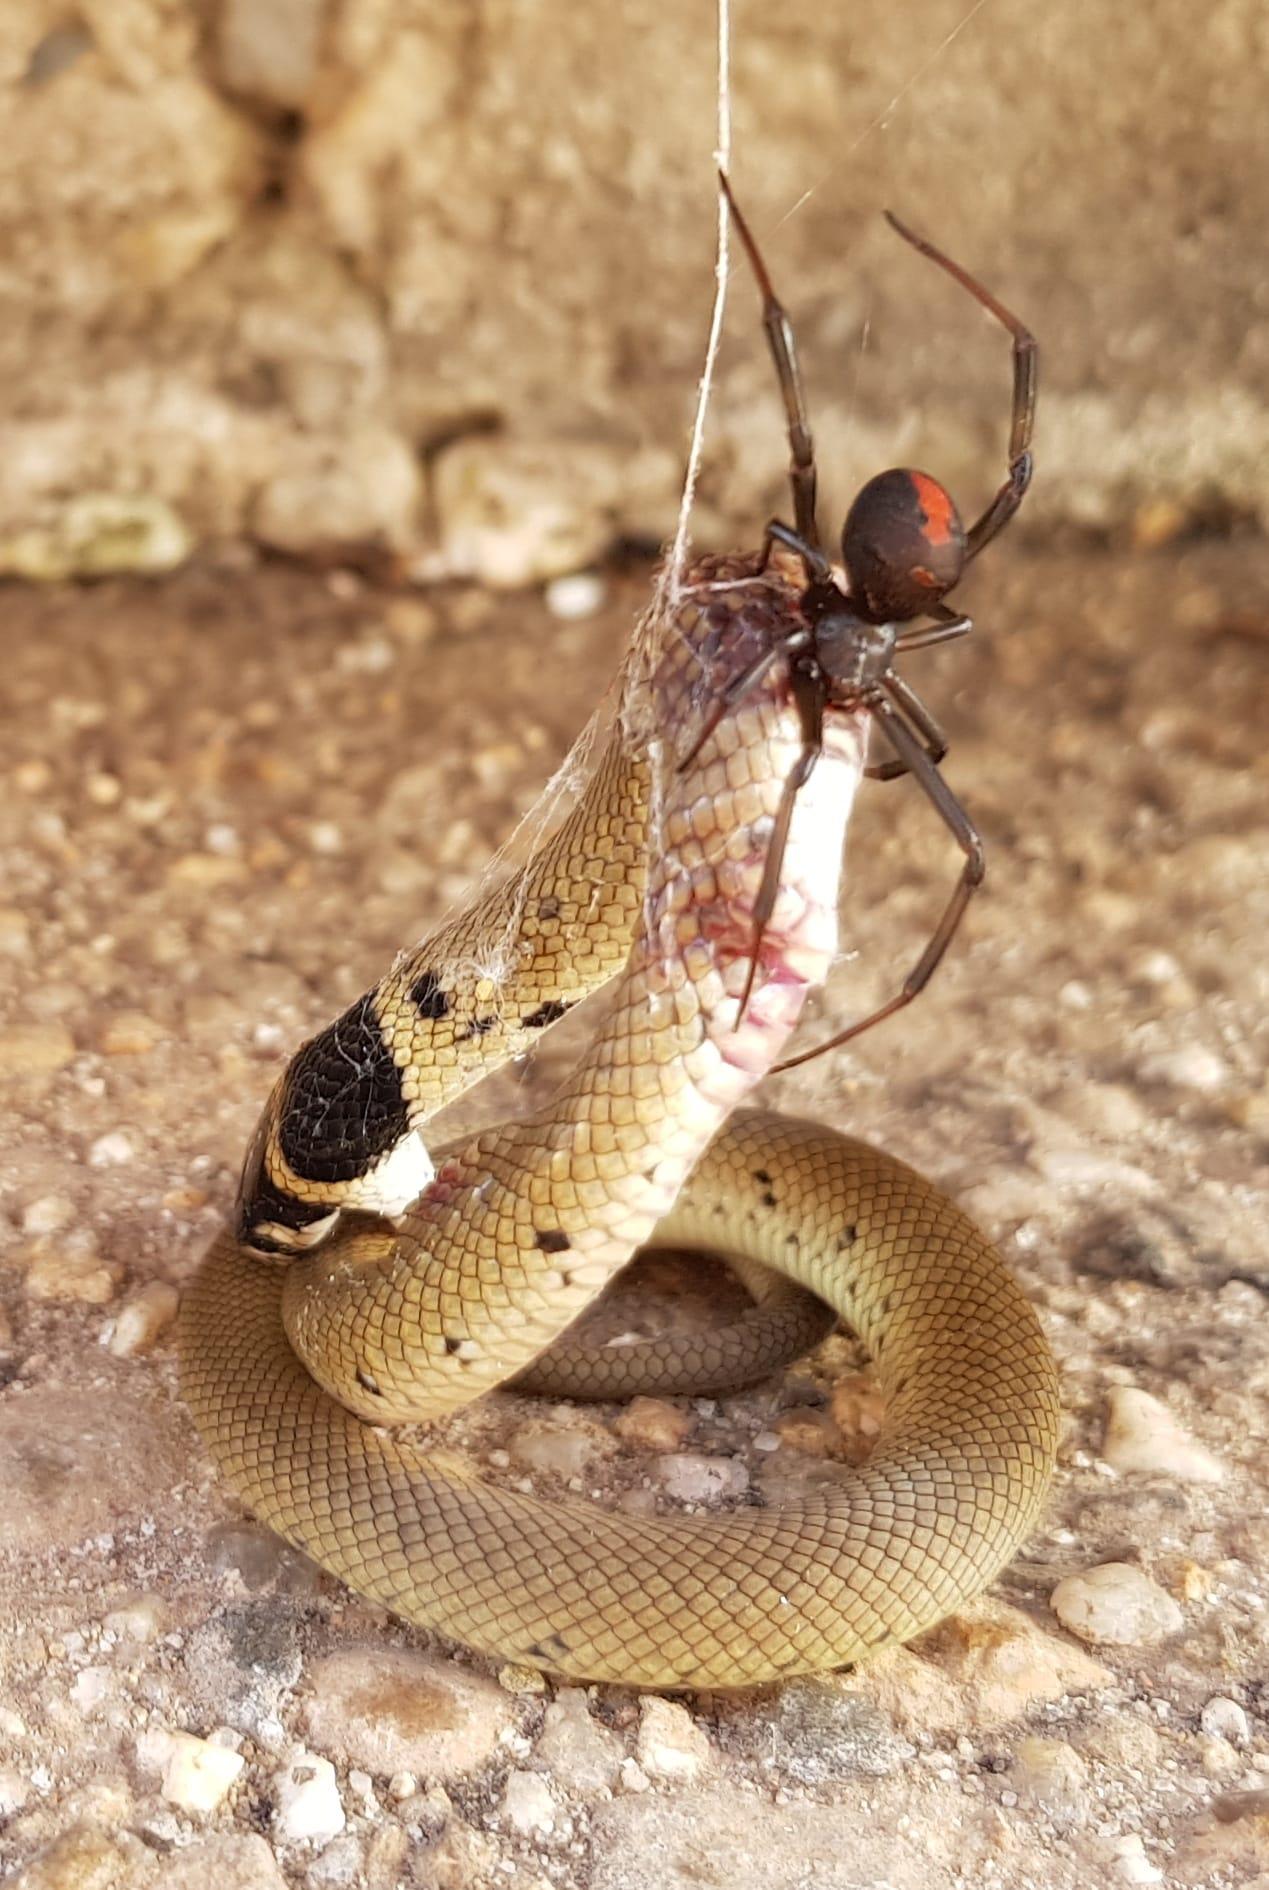 A Redback Spider killed and ate a Eastern Brown snake in Australia (Robyn McLennan)